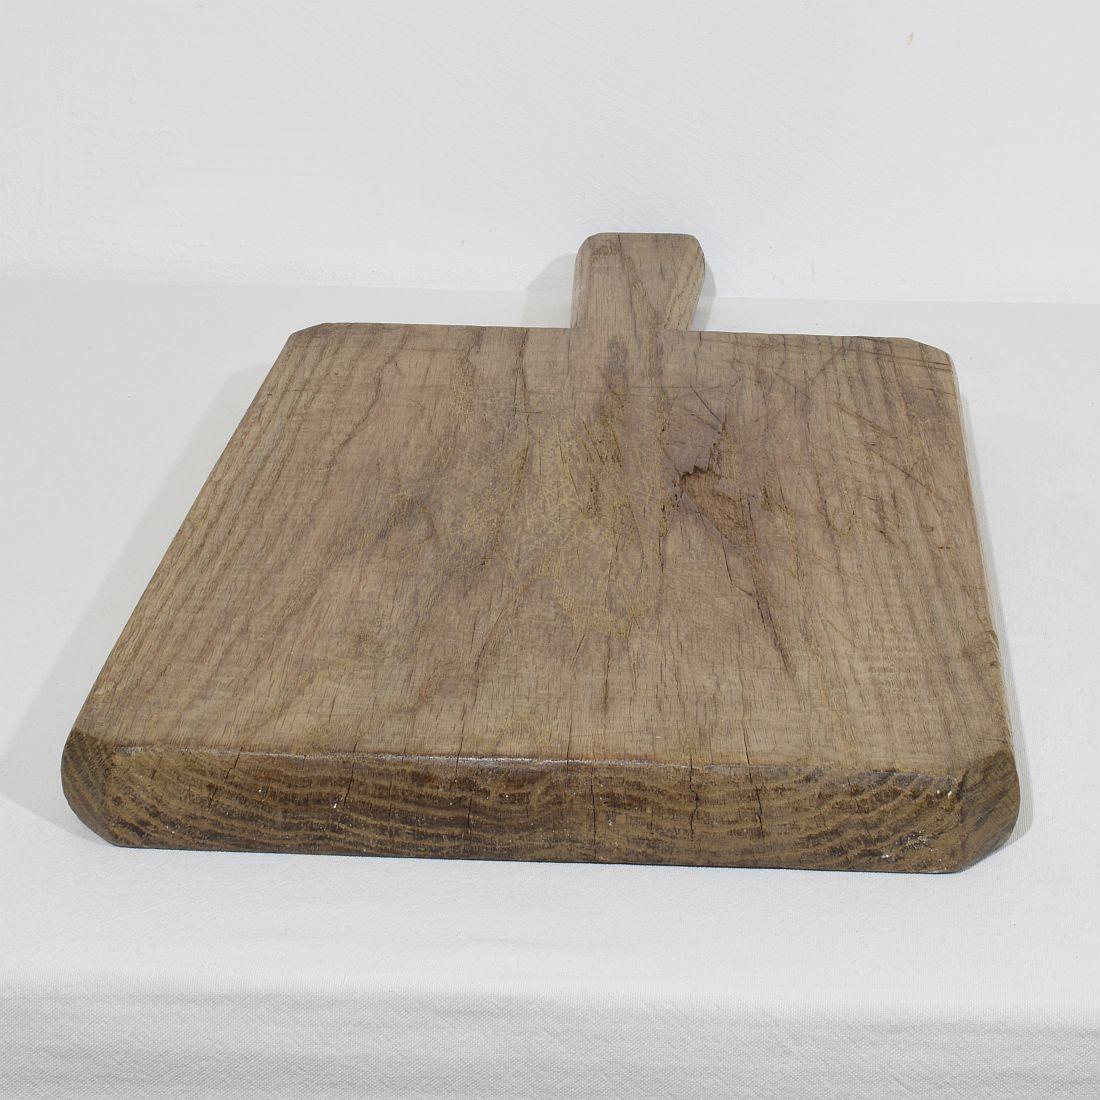 Pair of Two Rare French 19th Century, Wooden Chopping or Cutting Boards For Sale 6